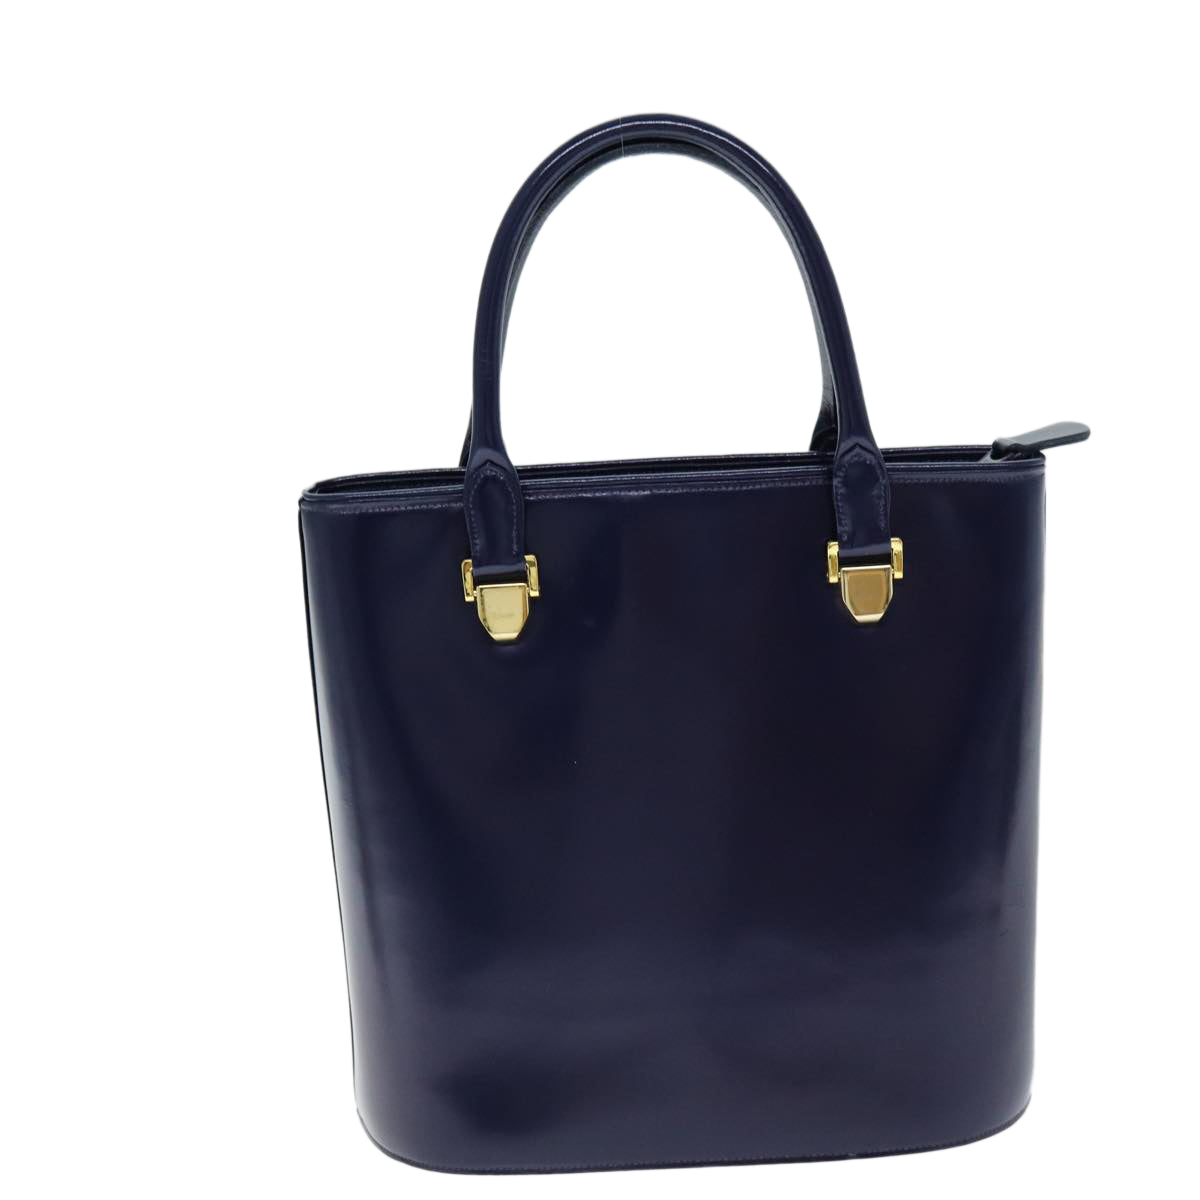 VALENTINO Hand Bag Leather Navy Auth bs14522